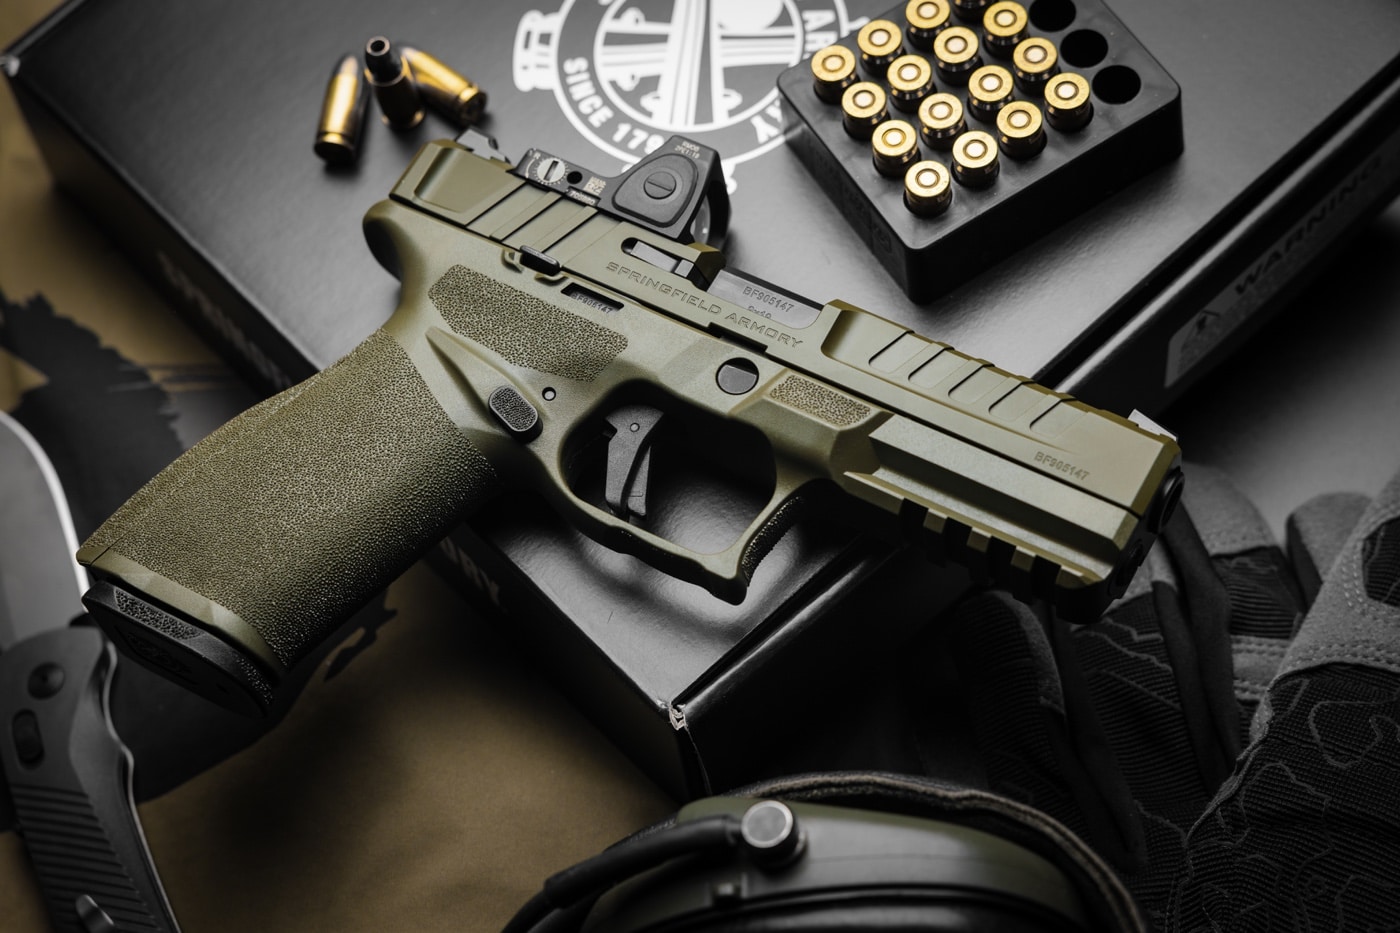 In this professional photograph, the OD Green version of the Springfield Echelon is prominent in the center of the image. Surrounding it are a number of other related items including 9mm ammo and electronic hearing protection.